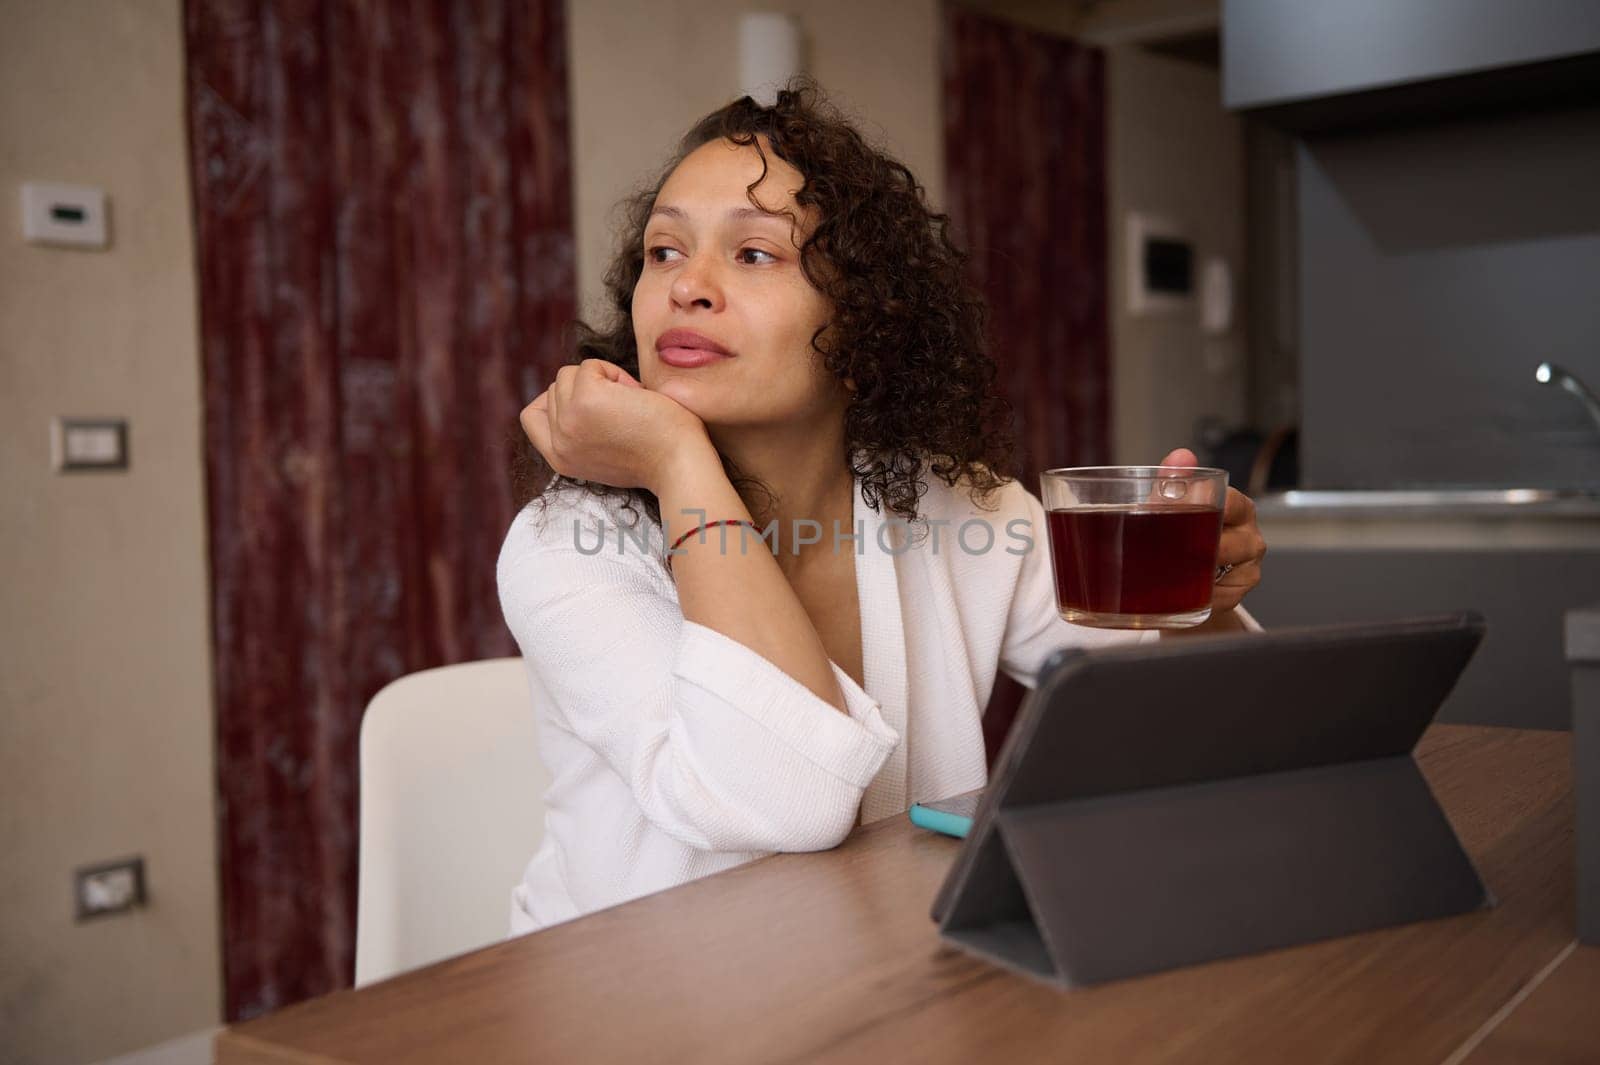 Relaxed young pretty woman in white bathrobe, holding cup of tea, dreamily looking aside, sitting t kitchen table in front of digital table in modern home interior. People. Communication. Internet. by artgf